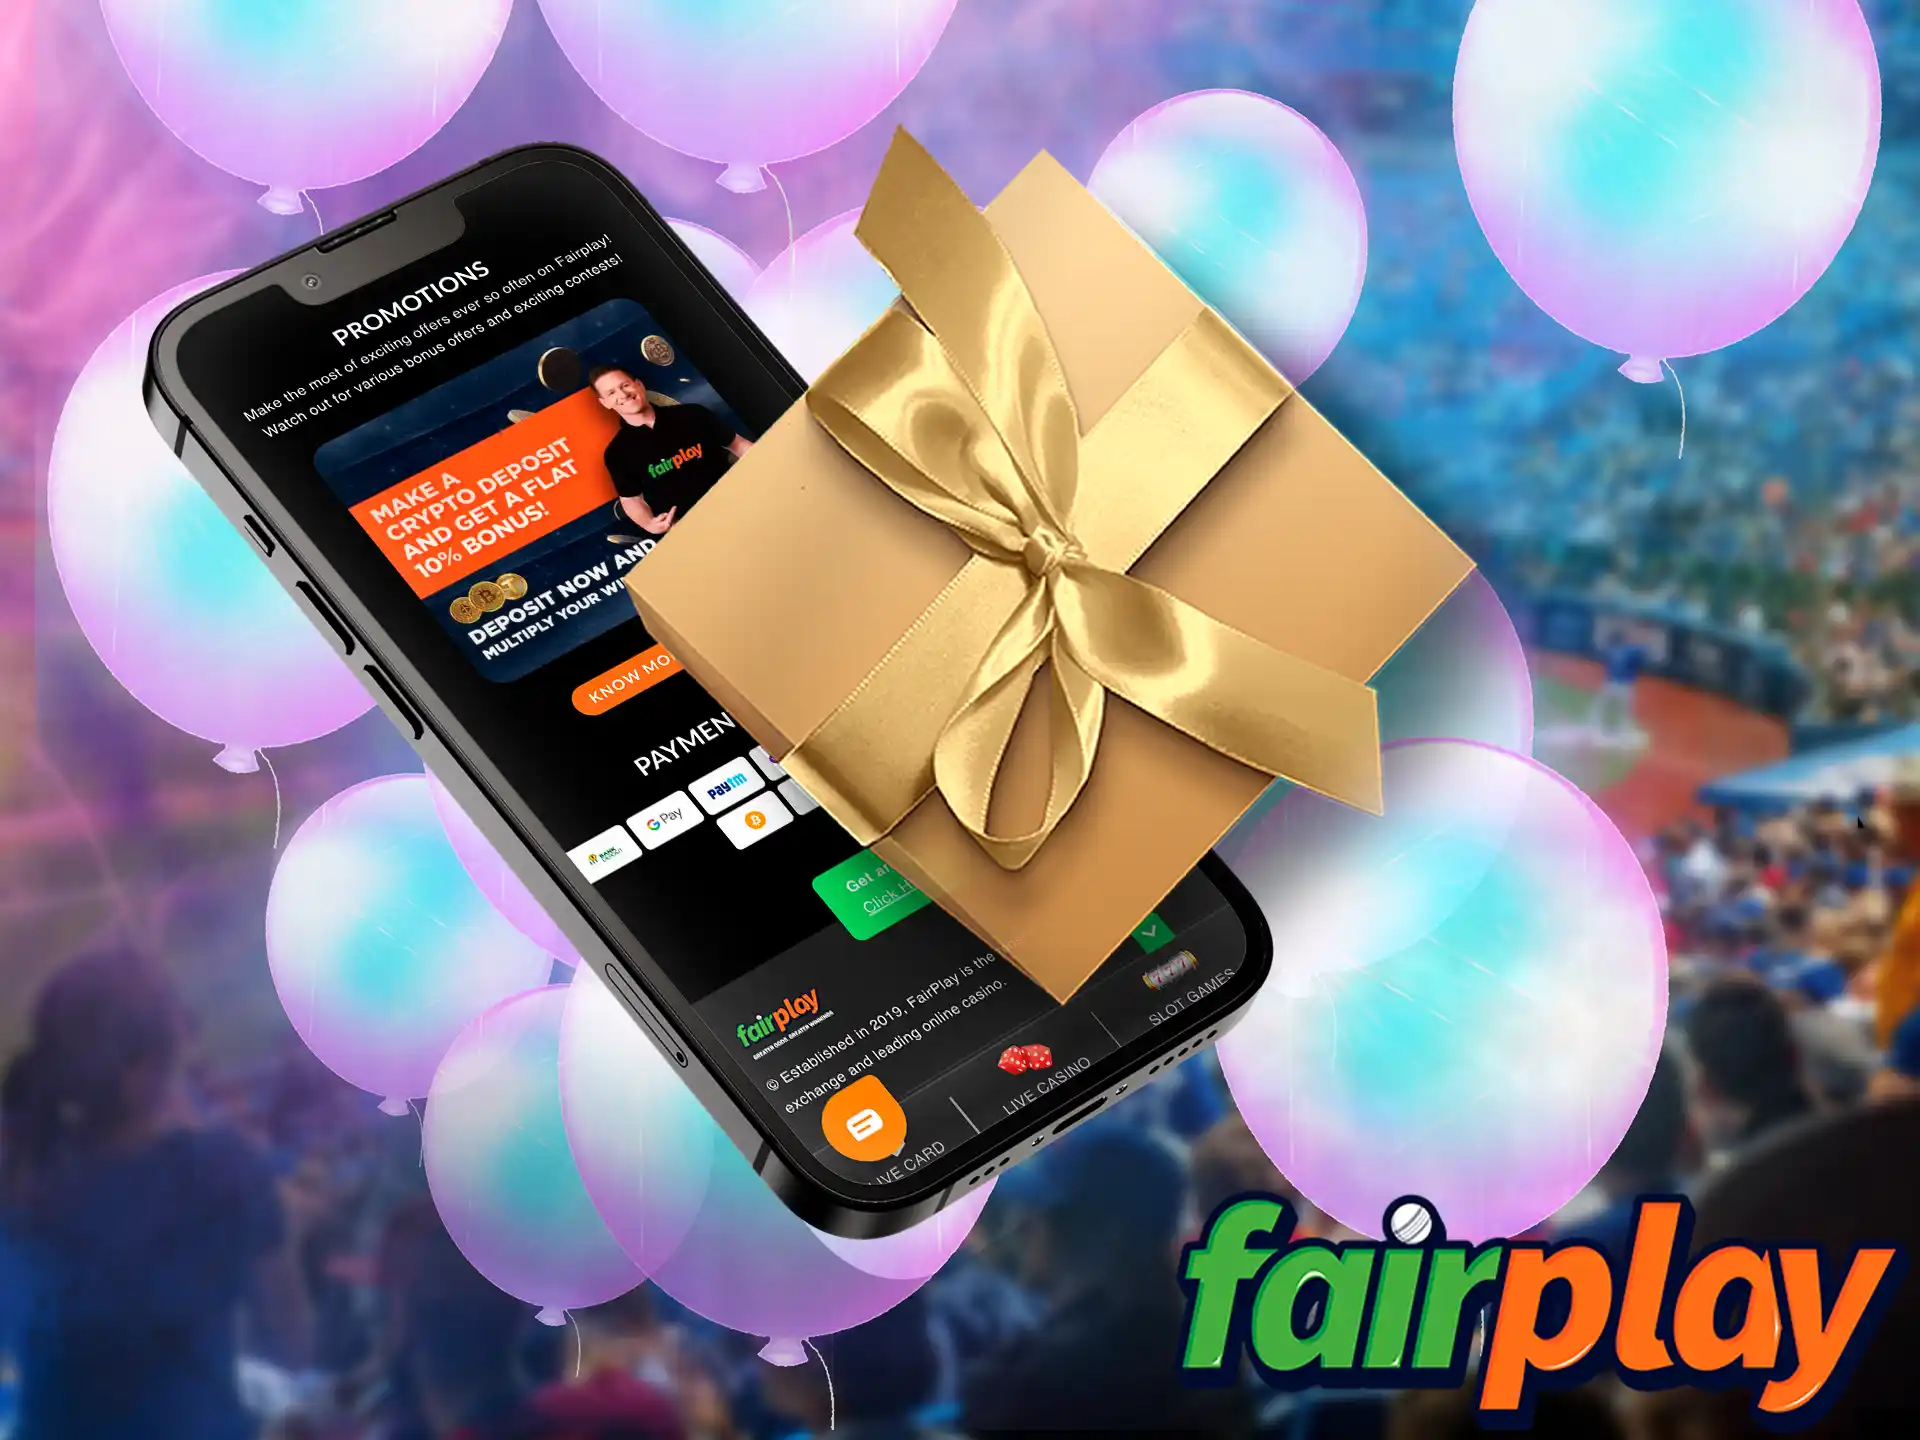 New users will receive a nice compliment from Fairplay for creating an account, it can be used in both casino and sports betting.